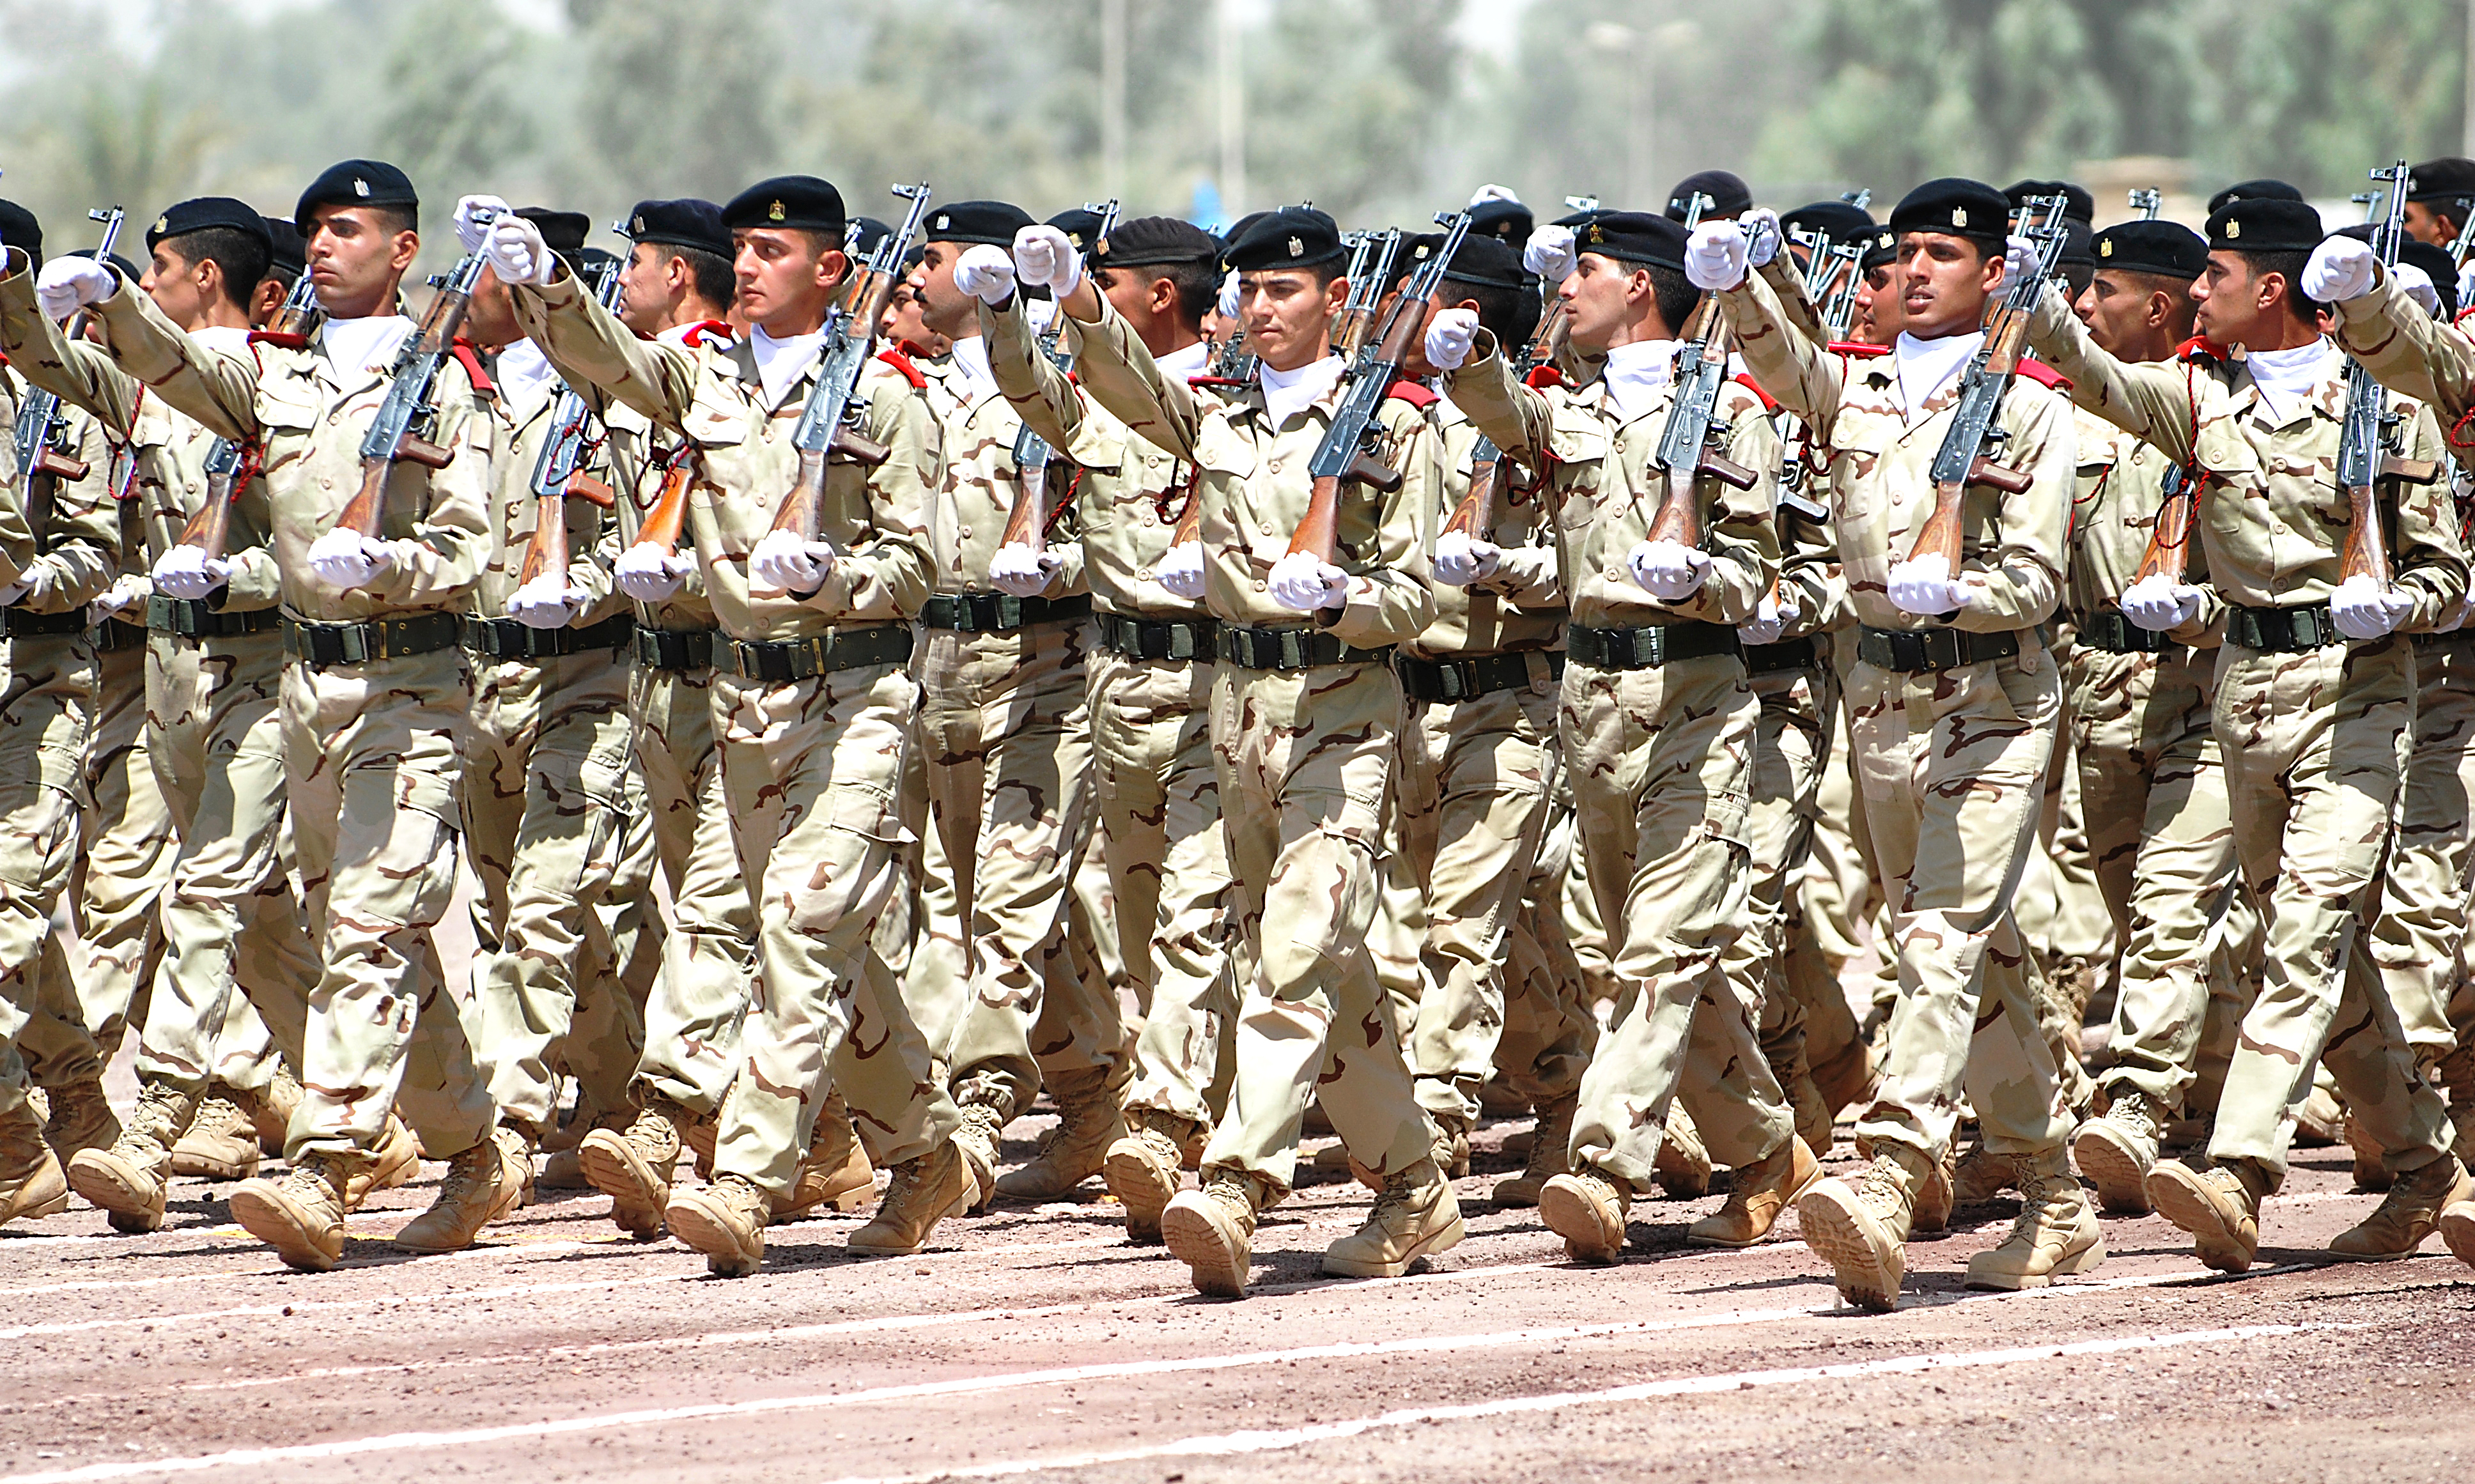 File:Soldiers during the parade.jpg - Wikimedia Commons